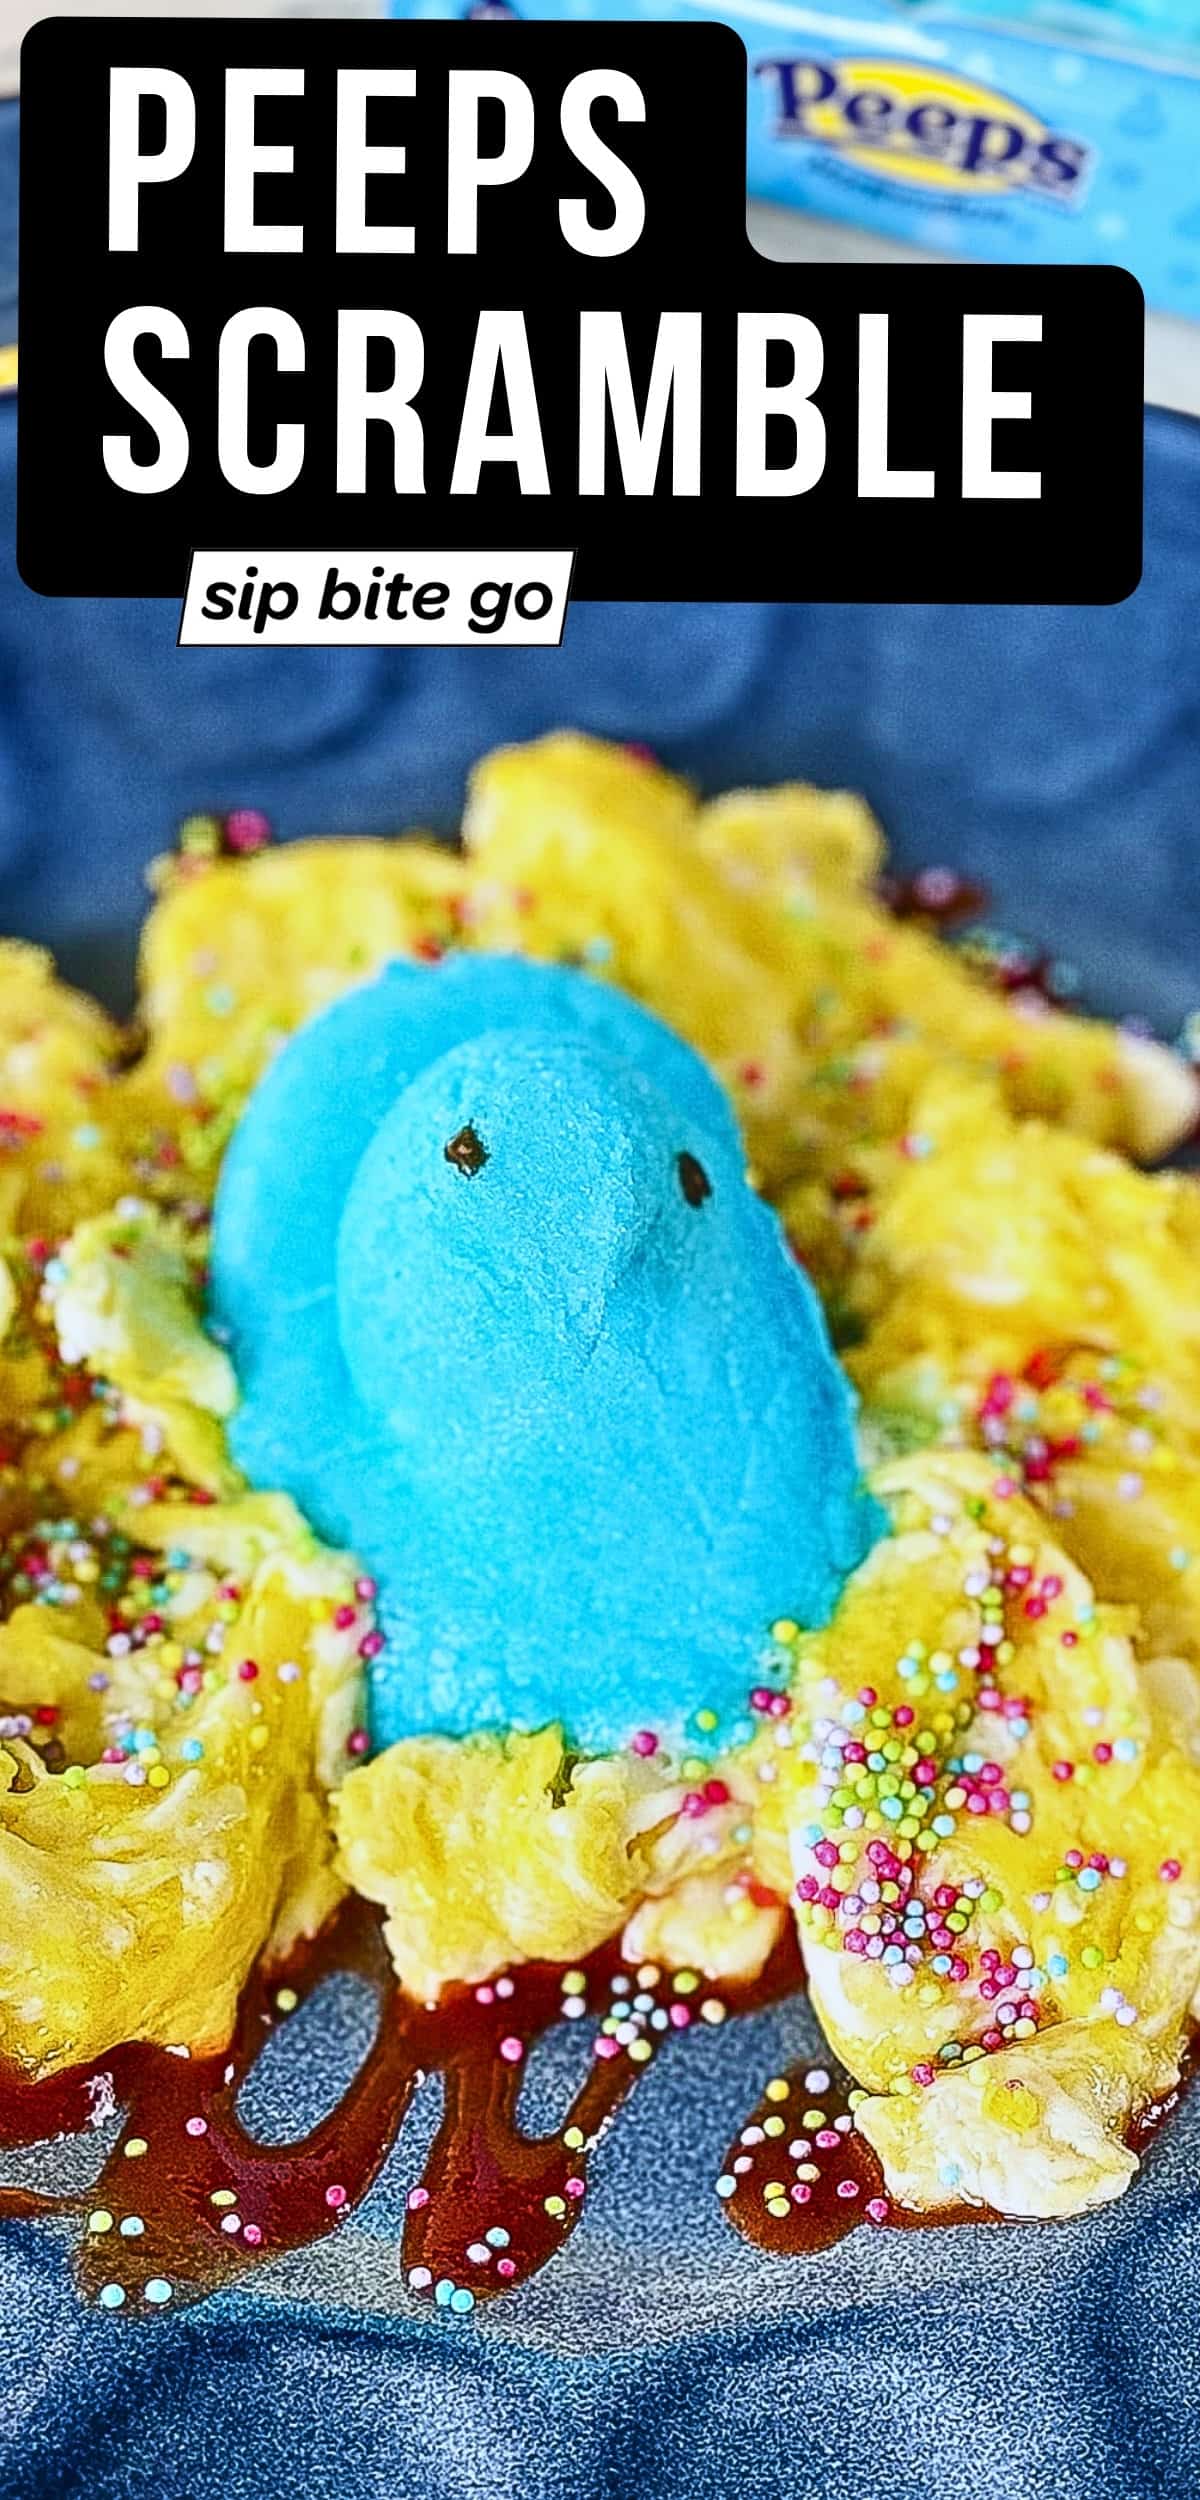 Peeps Scramble Easter Brunch Recipe with Easter candy box and text overlay